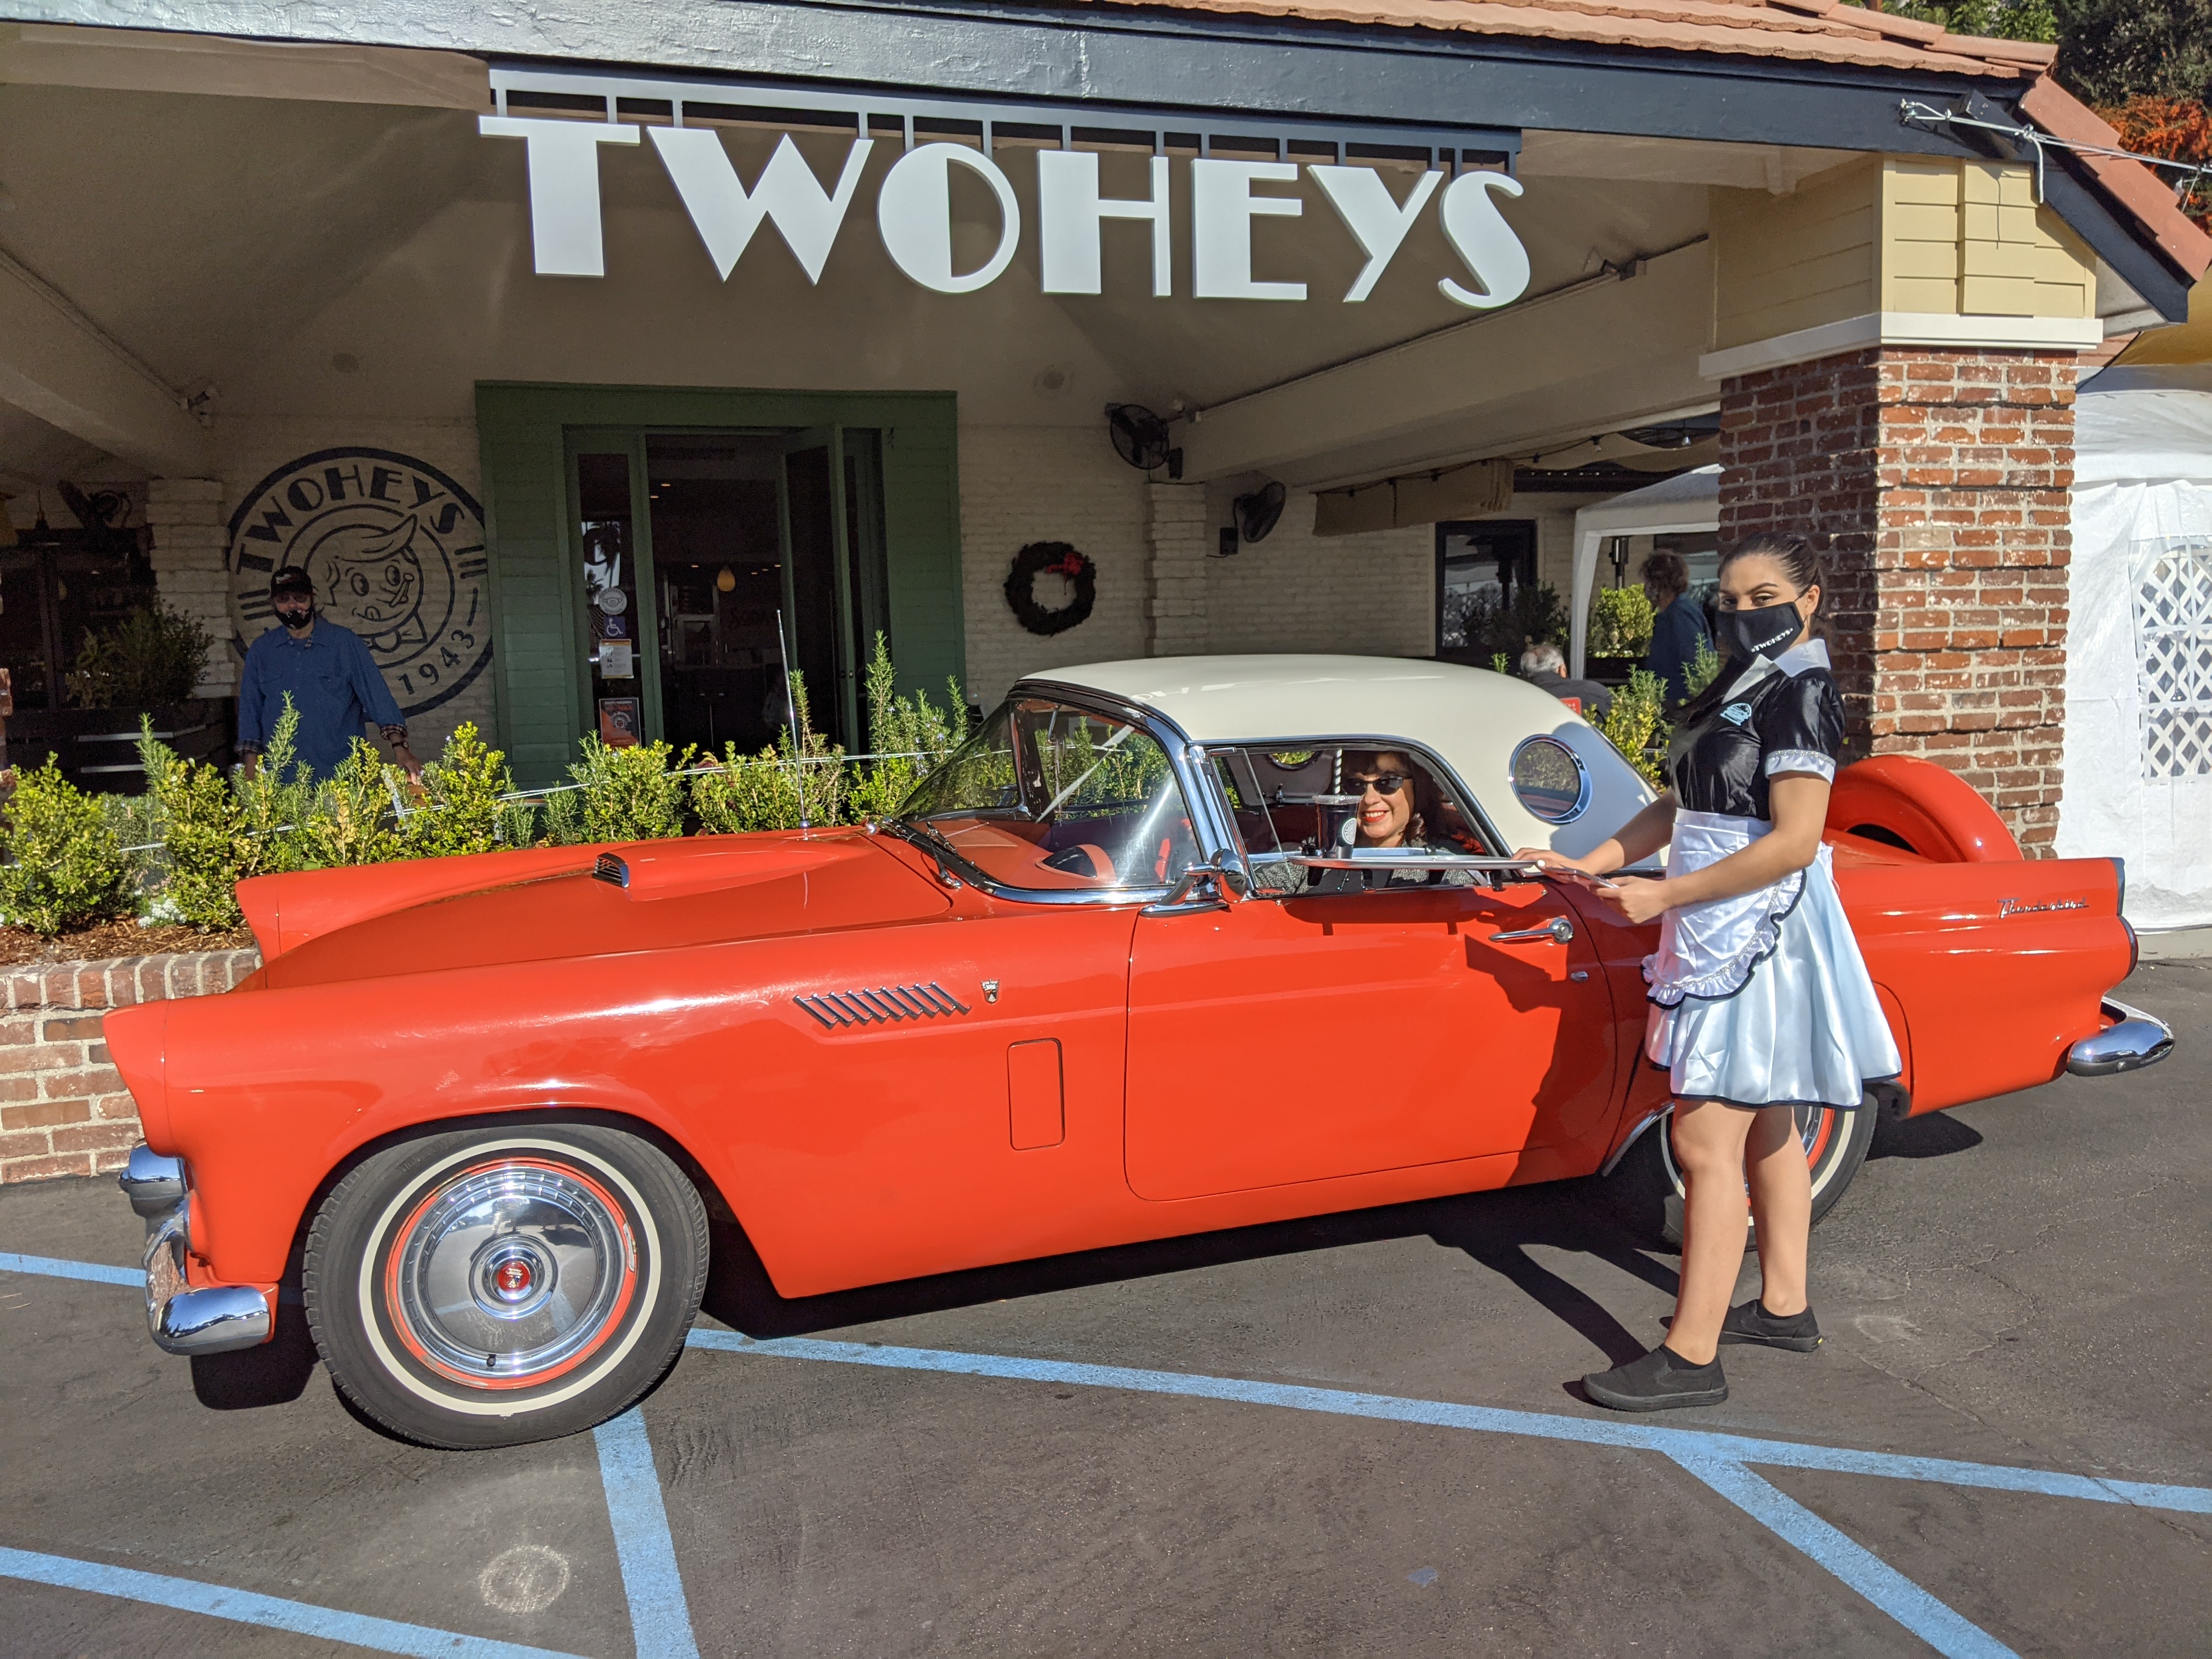 Trompers of Eagle Rock Car Club, the first customers to experience Twohey’s curbside car hop in South Pasadena, California